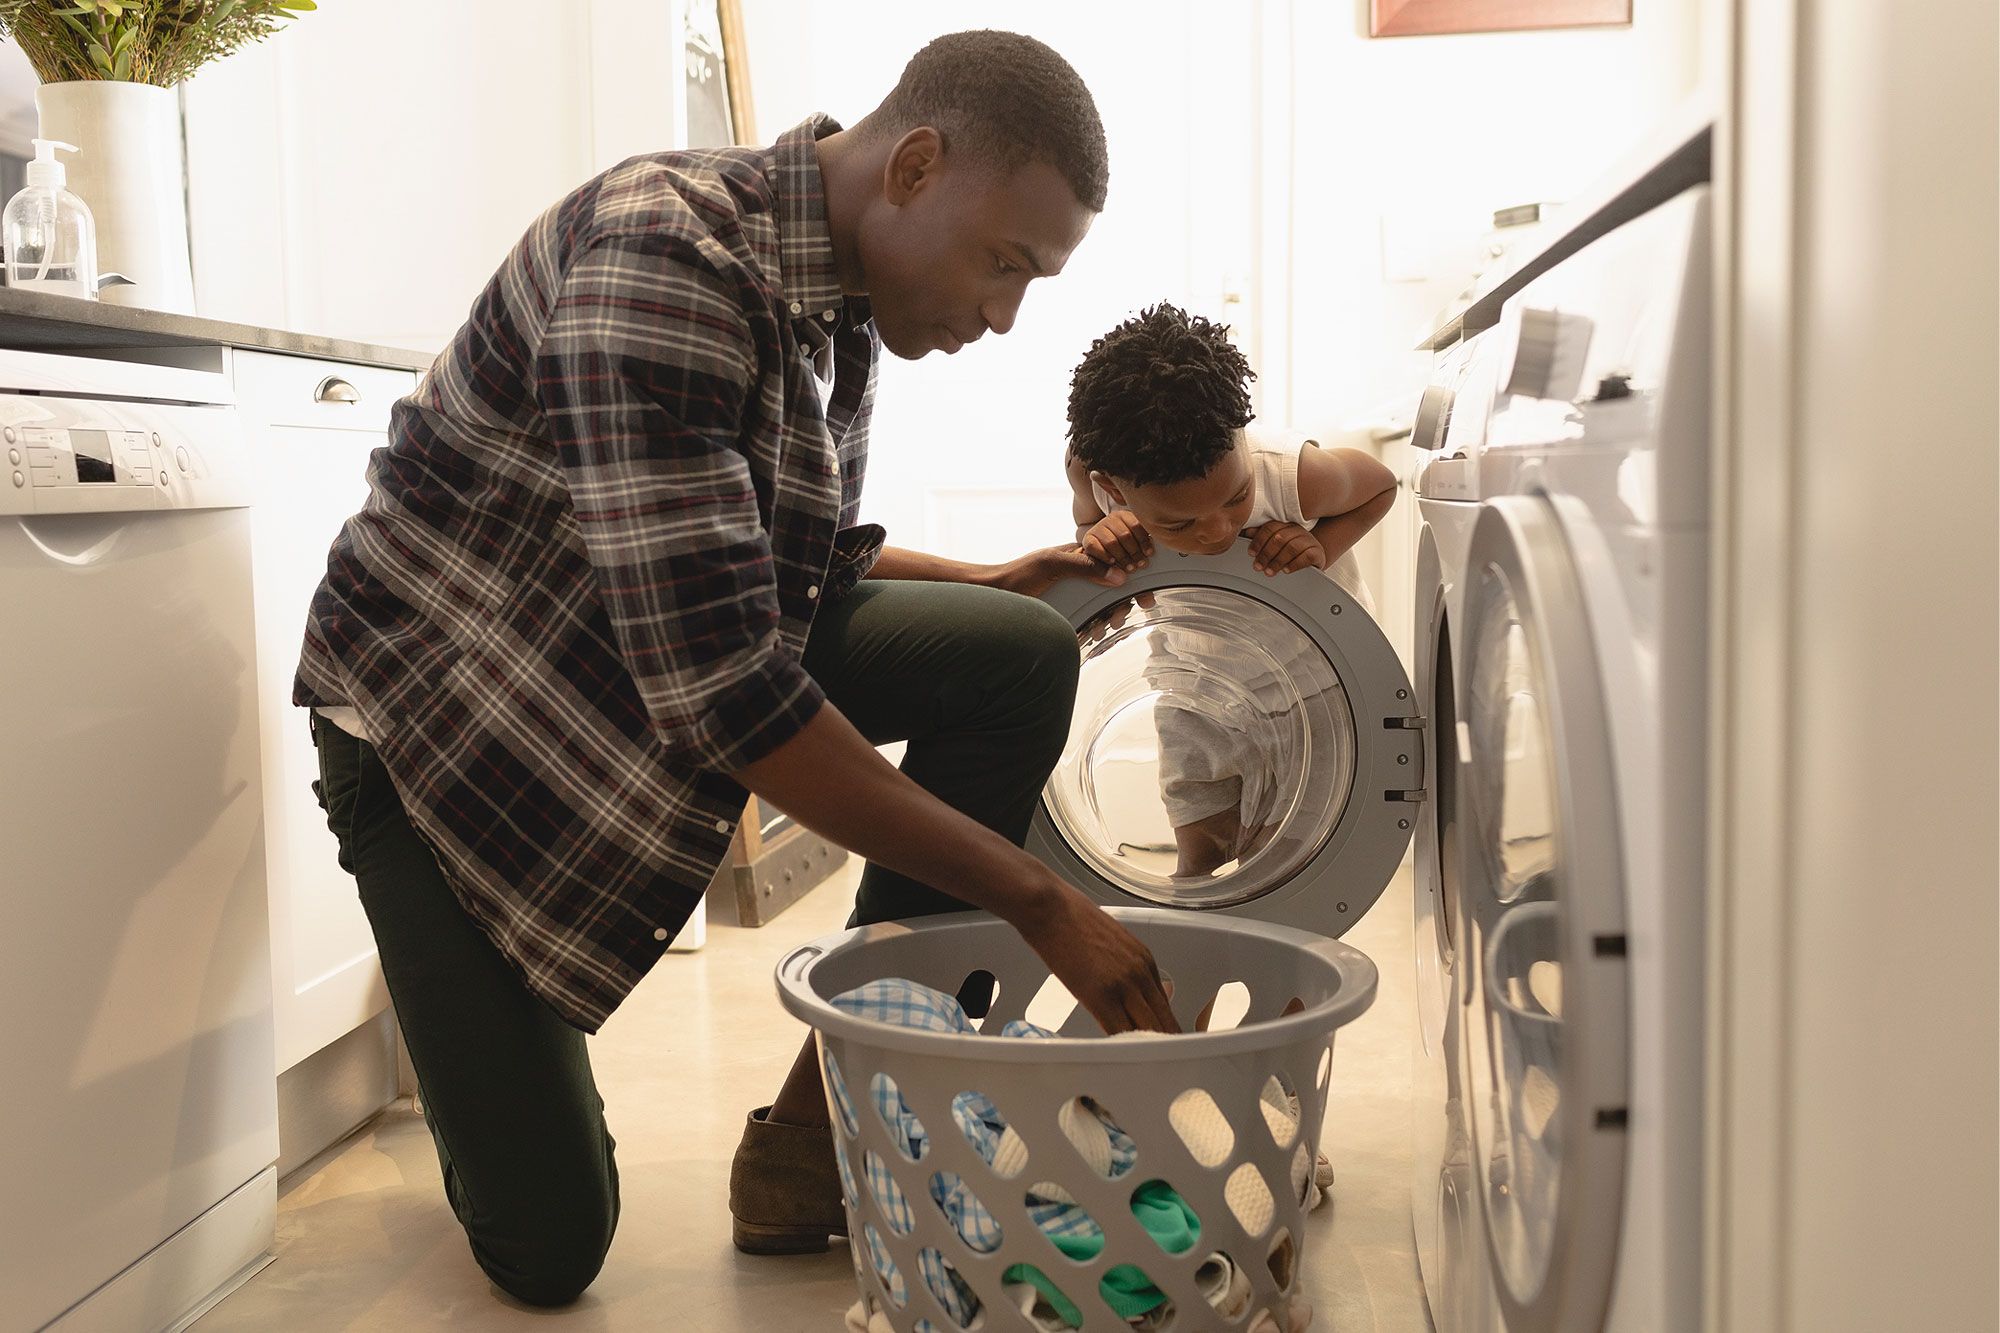 Laundry expert Patric Richardson on properly caring for clothes